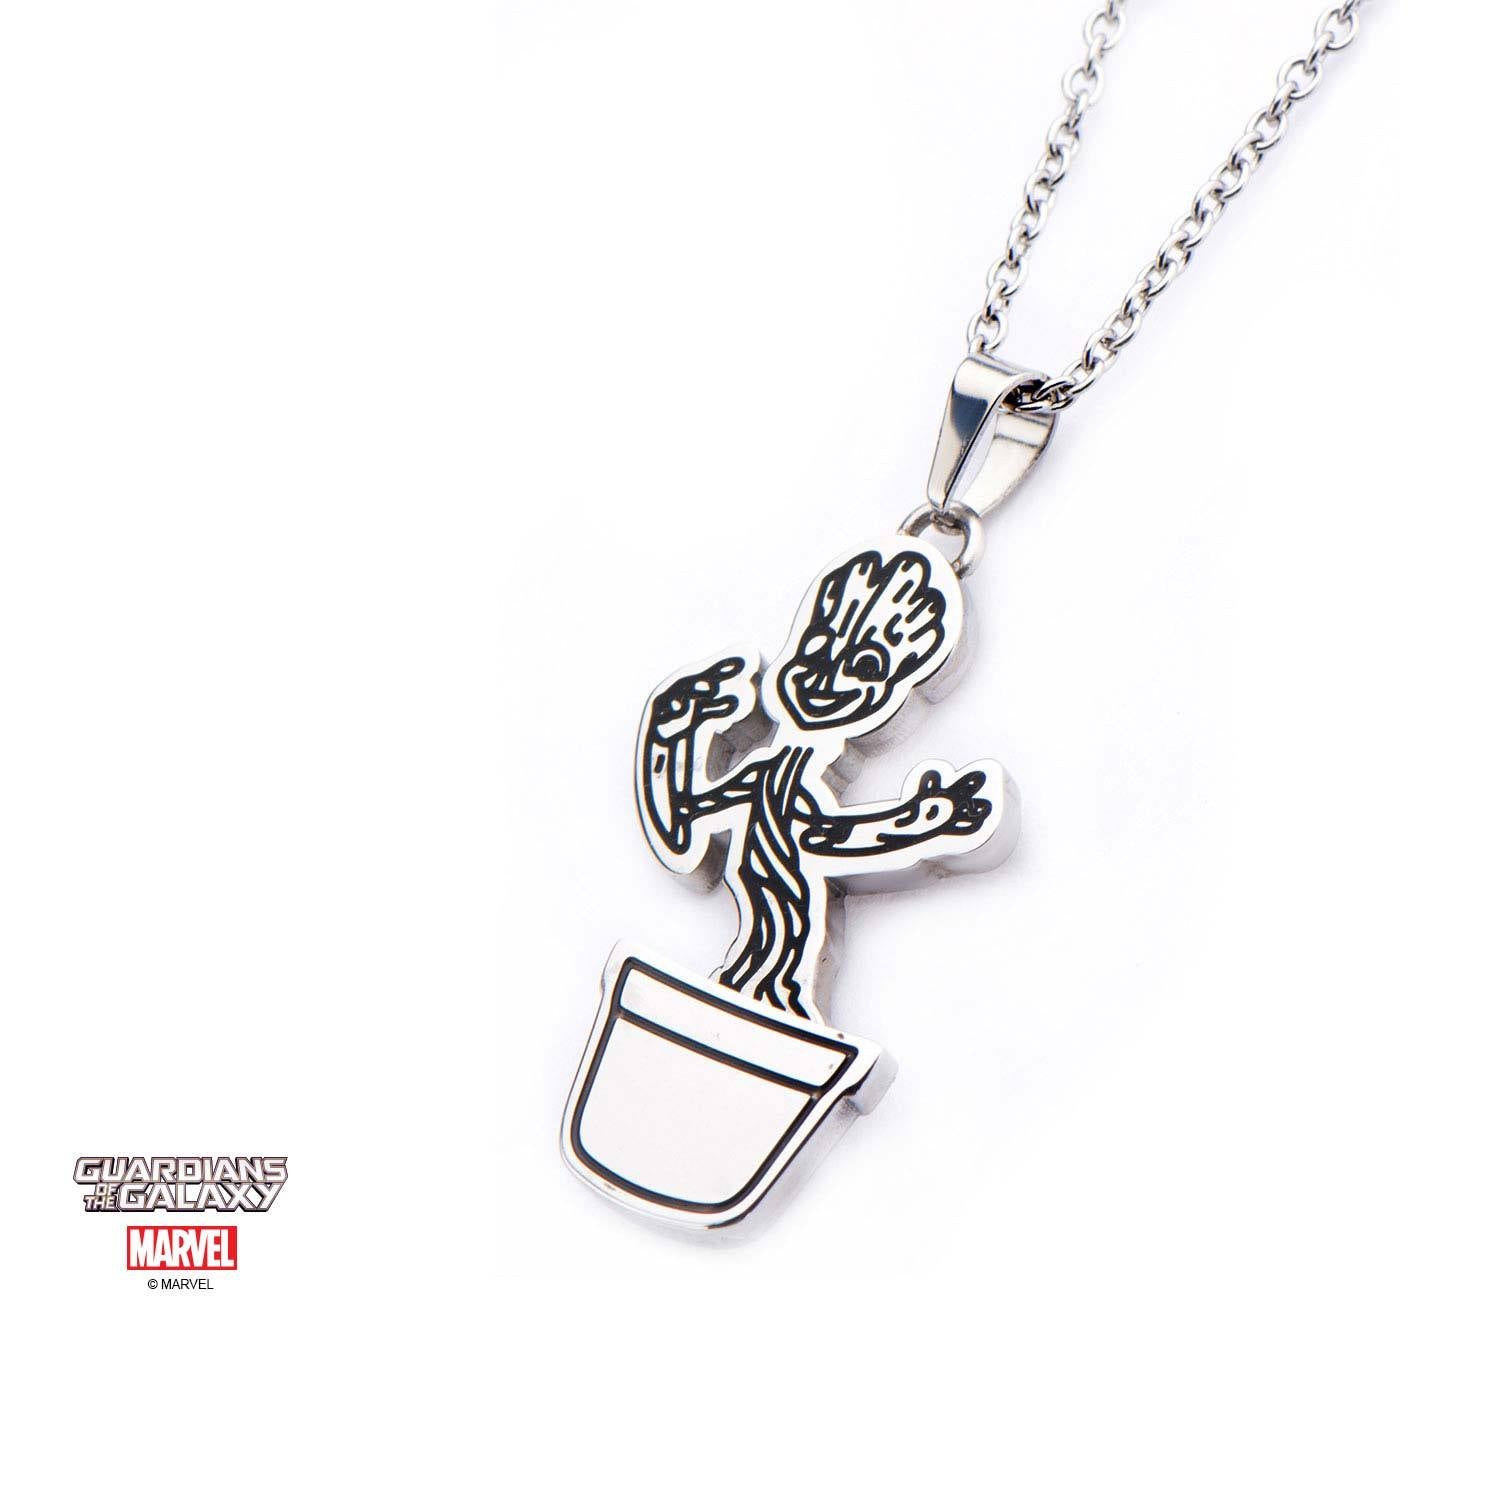 Marvel Guardians of the Galaxy Dancing Baby Groot Pendant Necklace